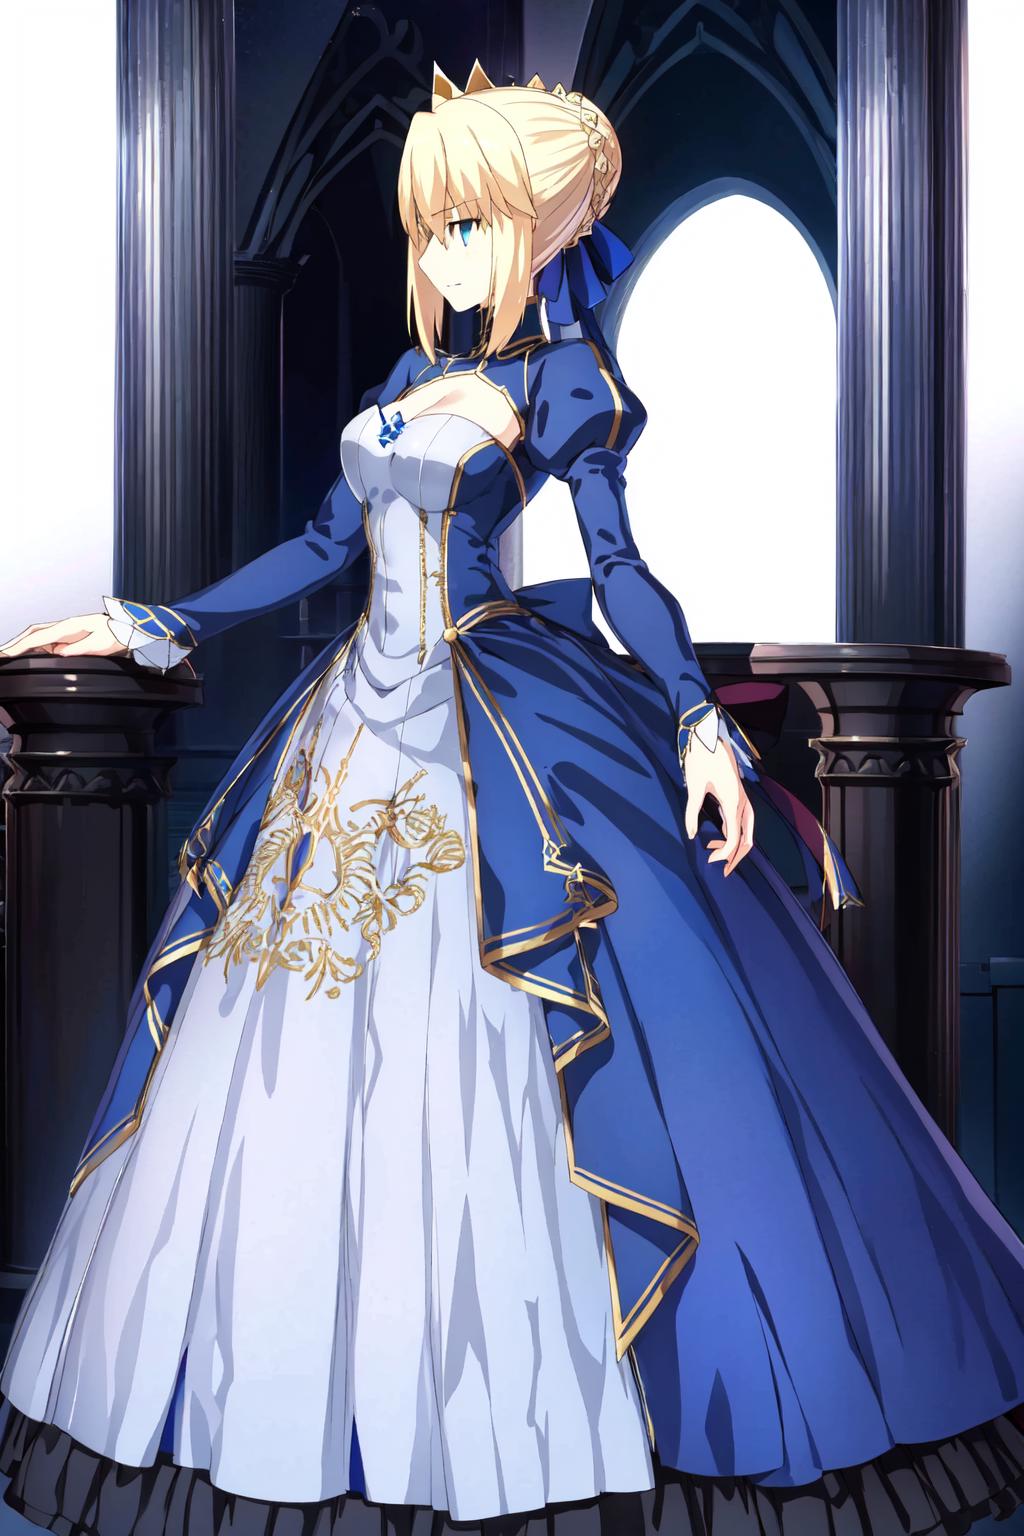 FGO Sprite Style image by ToshiBaguette